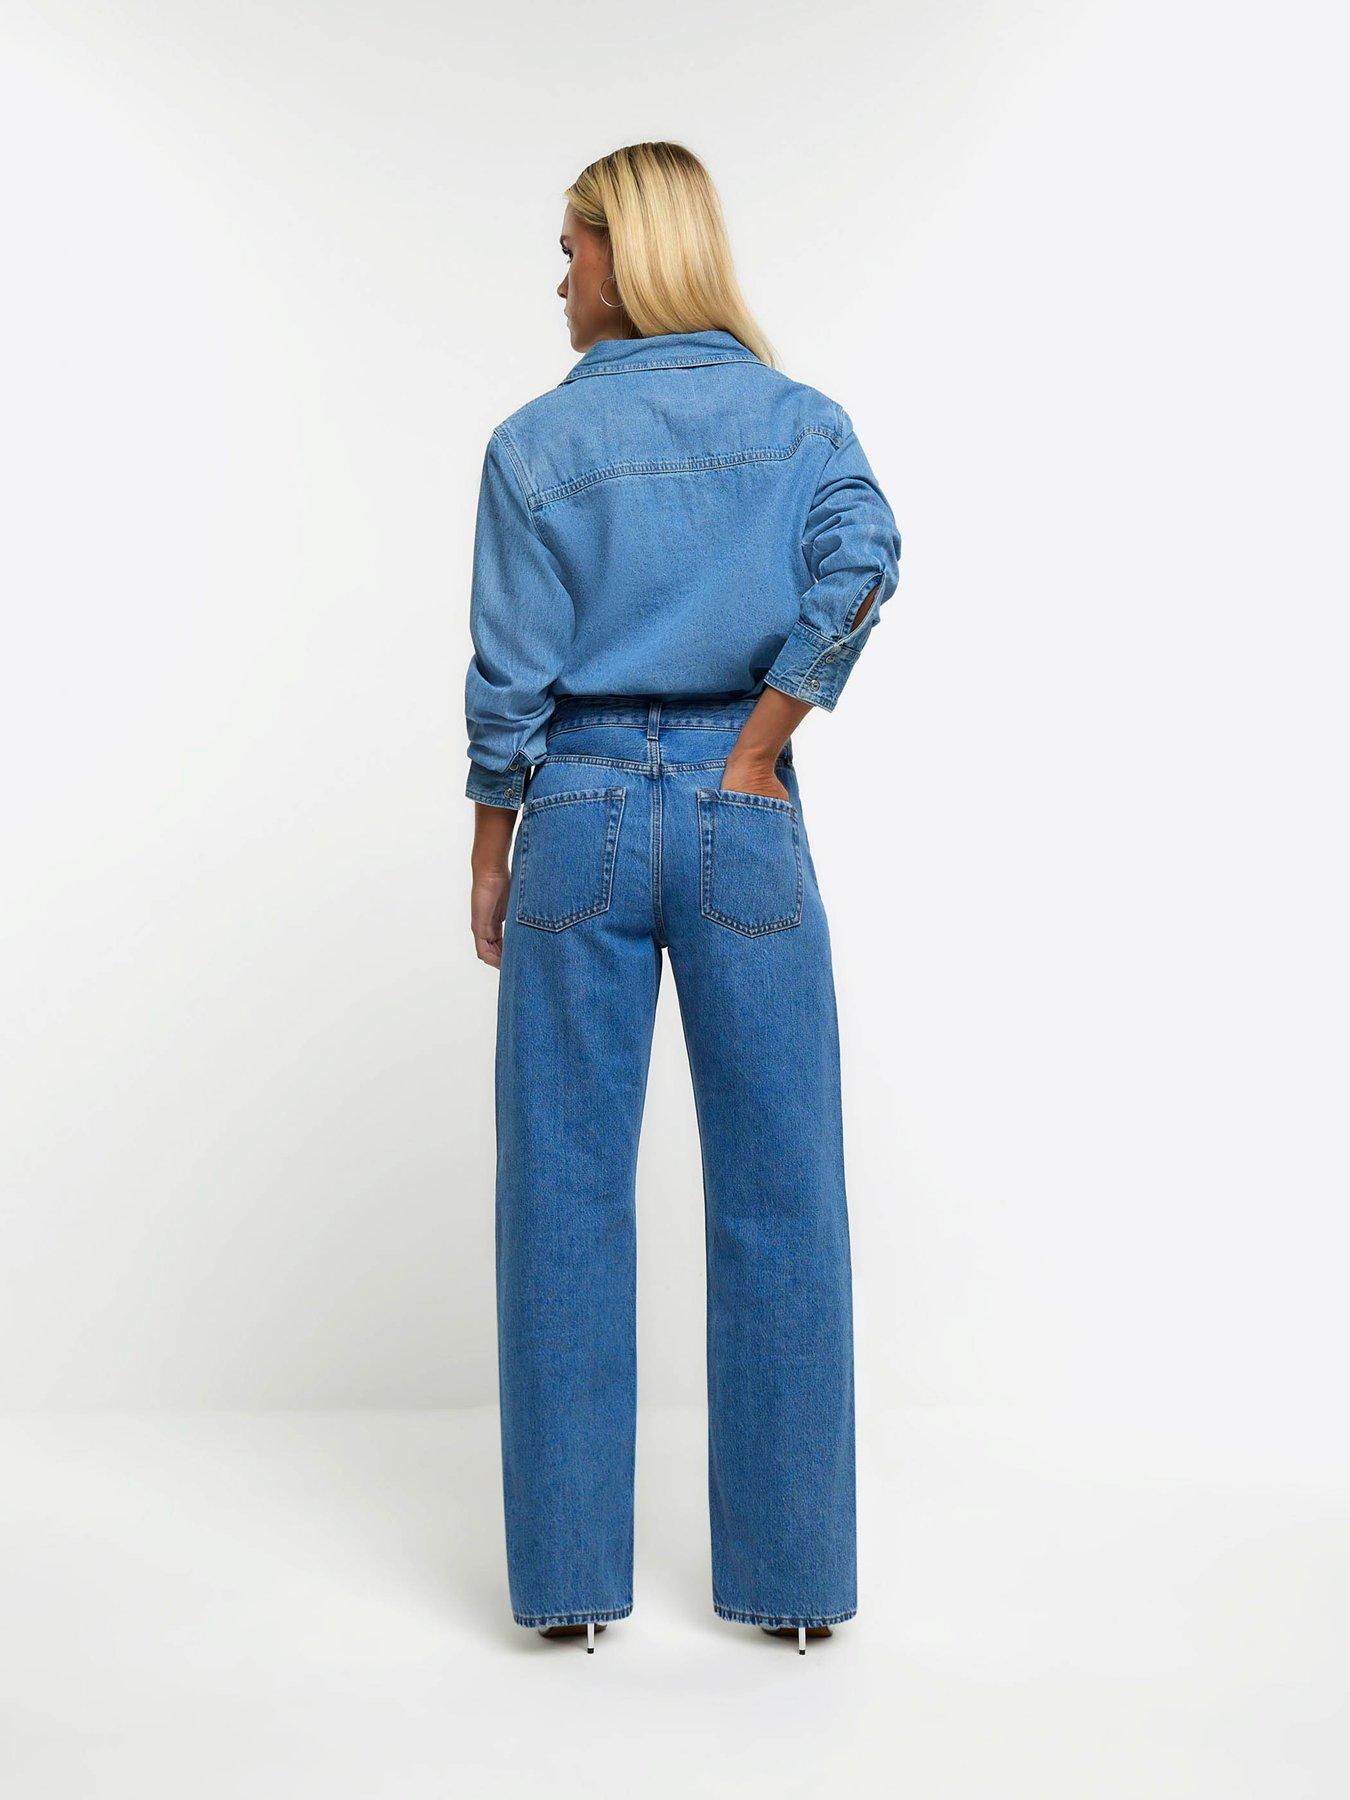 River Island Petite 90s Long Straight Jagger Jeans - Blue 